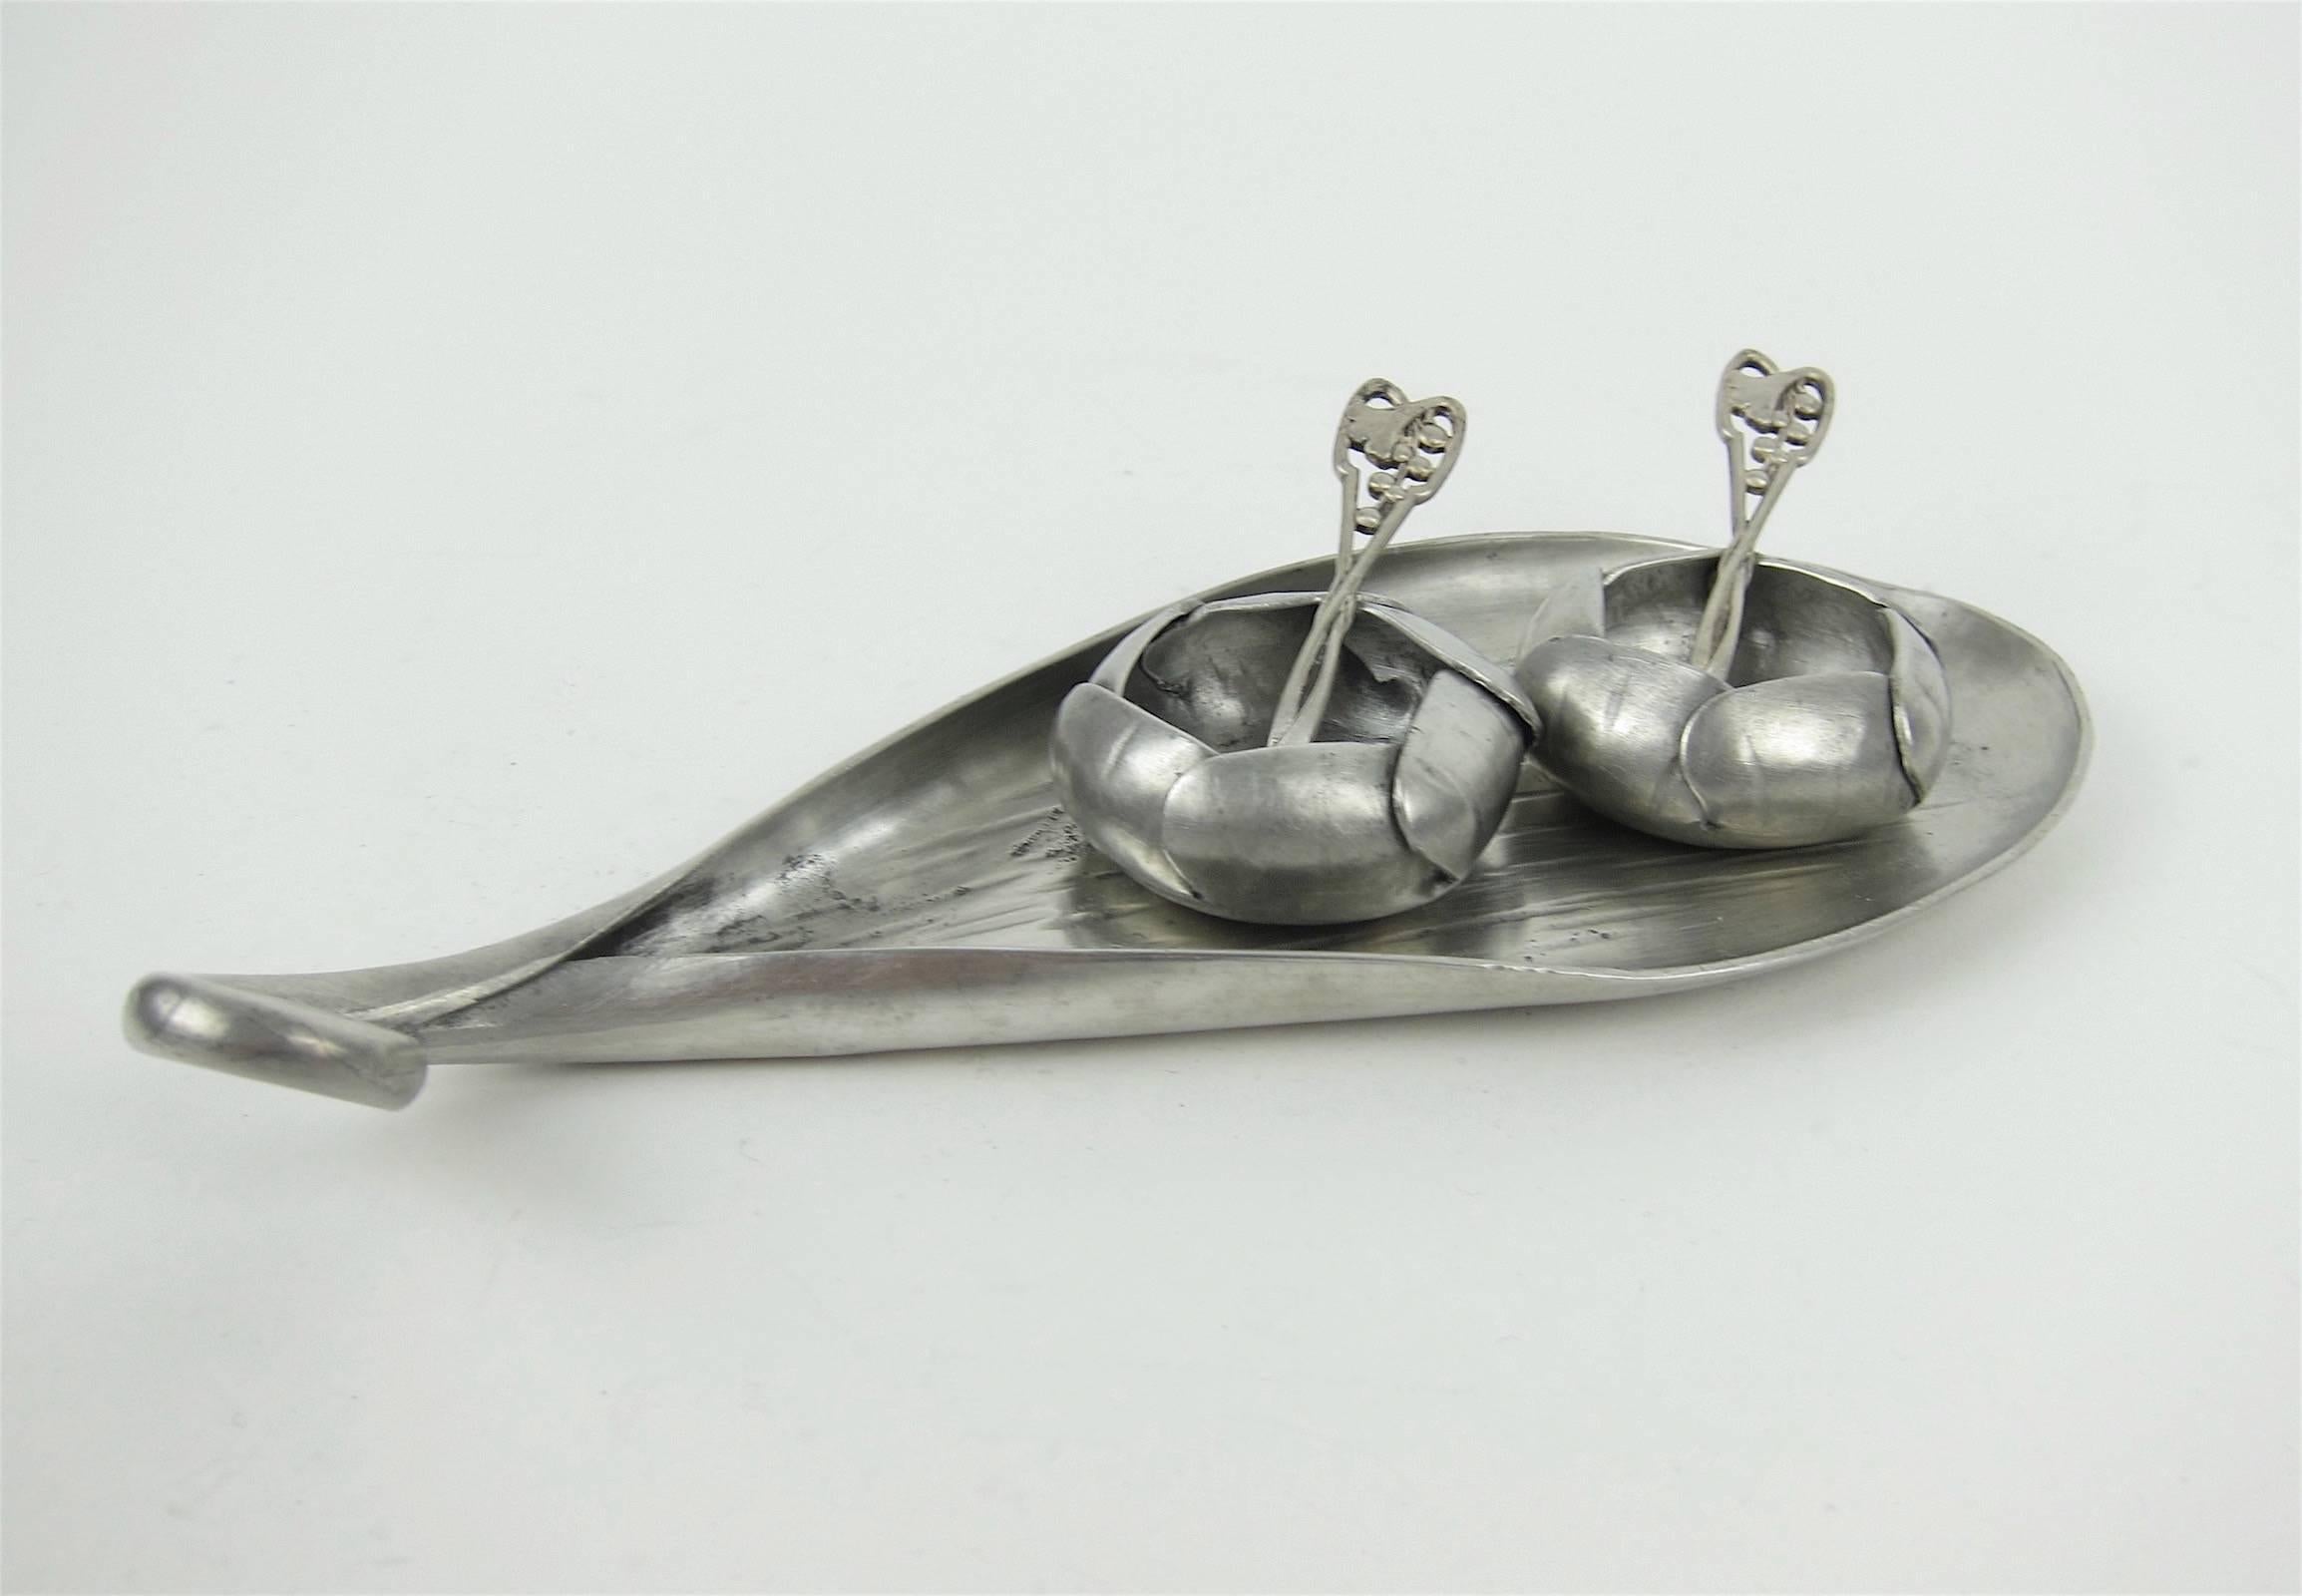 An exquisite early 20th century French Art Nouveau open salt and pepper set in hand-wrought and engraved pewter consisting of two floral-form salt cellars with overlapping petals, two spoons and an under plate with an elegantly swirled handle by